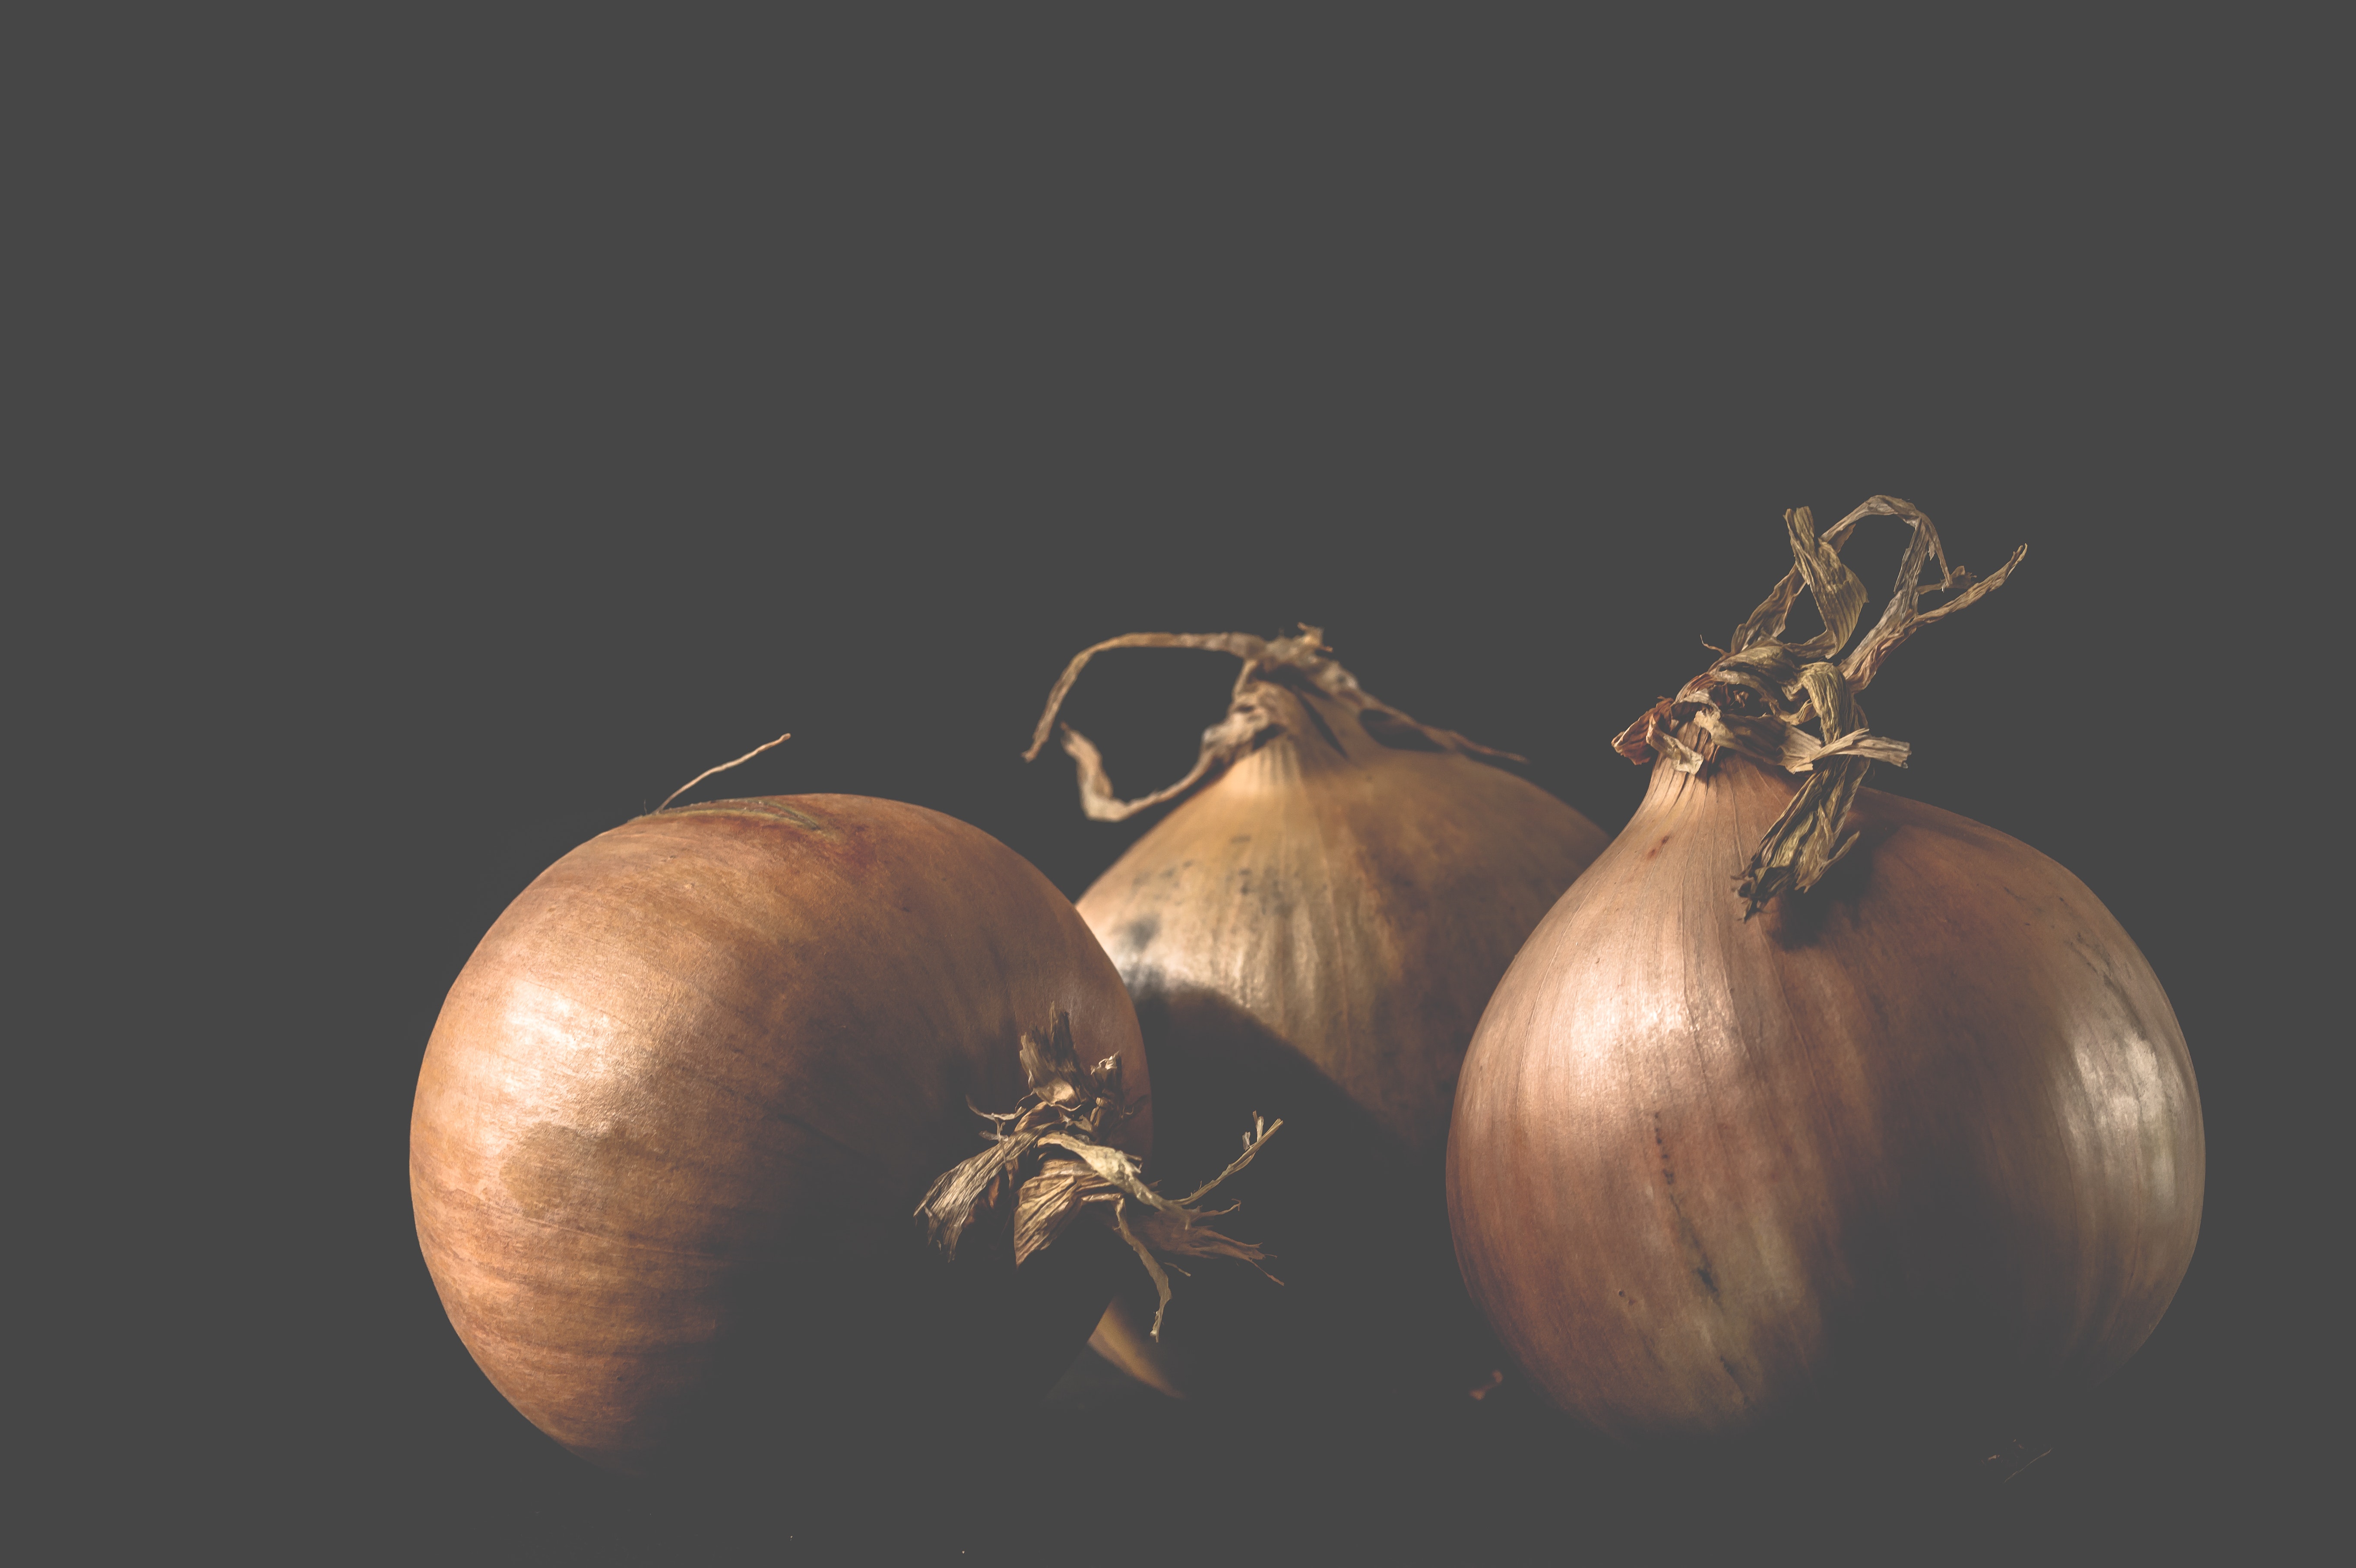 Diabetes can be controlled by drinking onion water